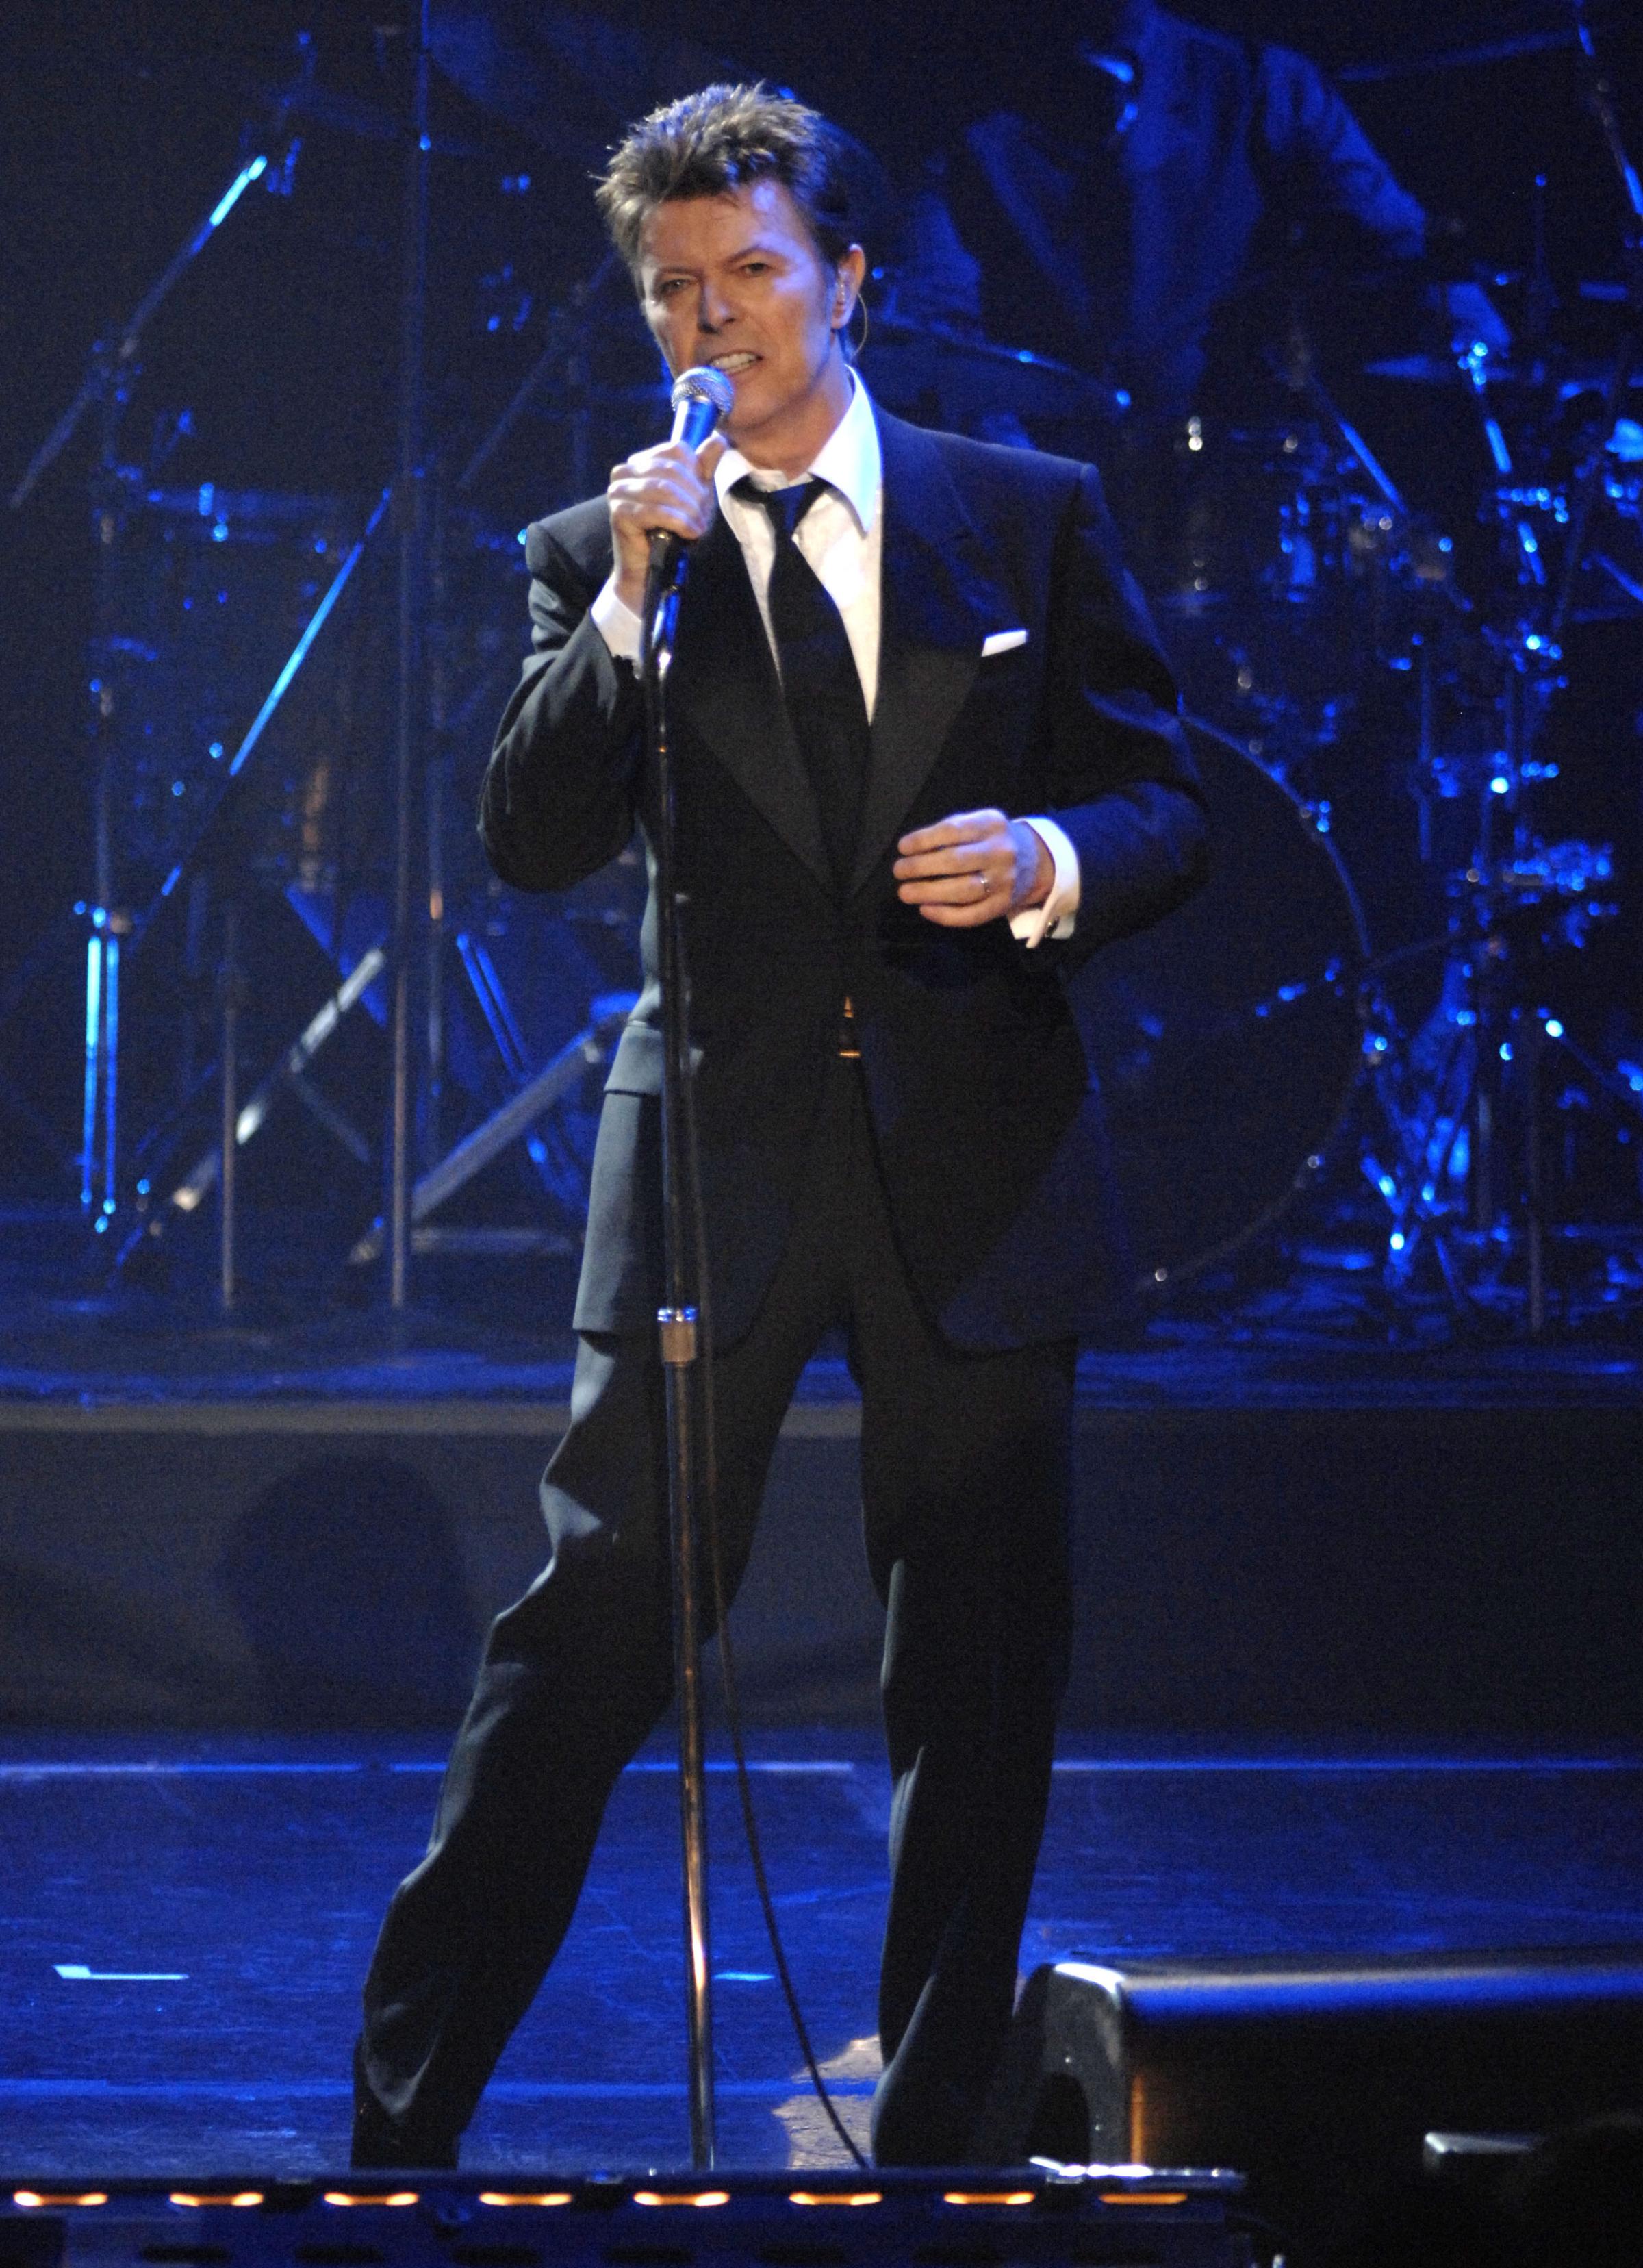 David Bowie during his last live performance on Nov. 09, 2006 in New York City.